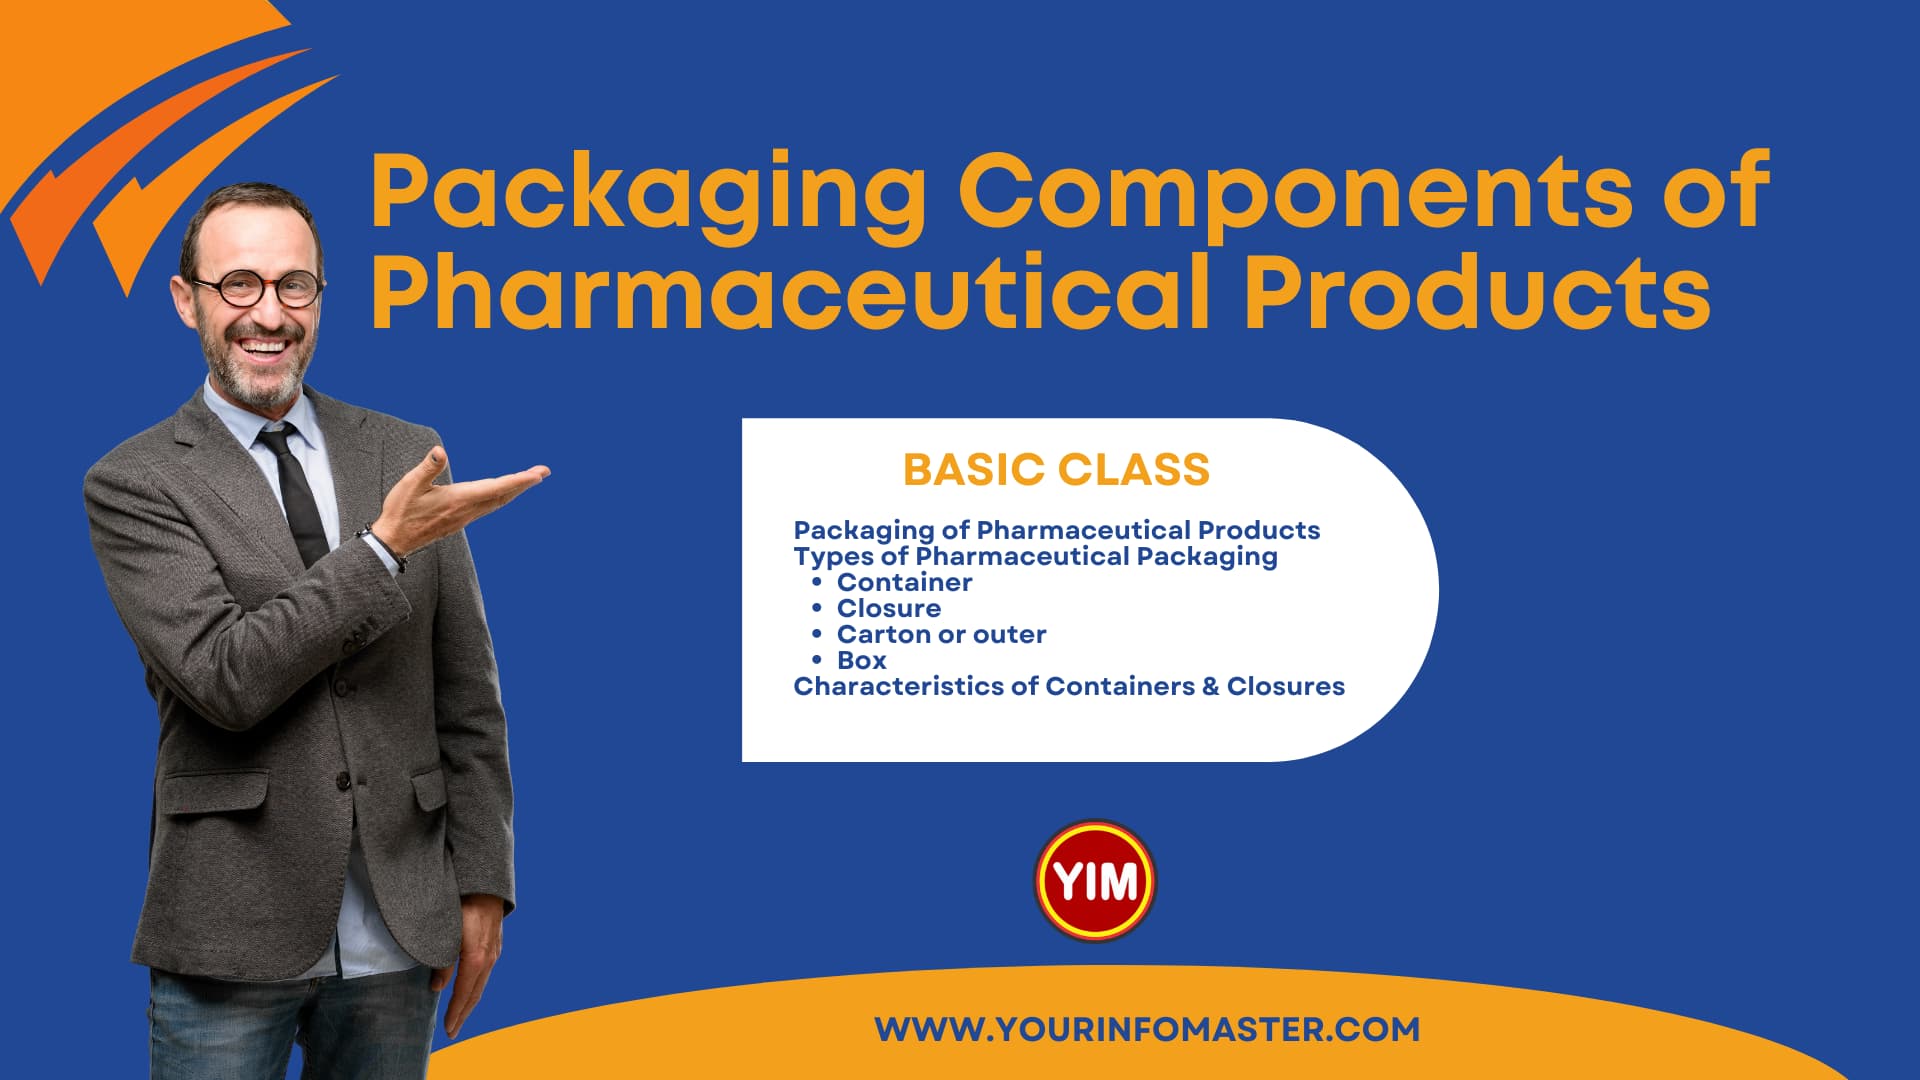 Packaging of Pharmaceutical Products, Pharmaceutical Products, Pharmaceutics, Process of Packaging of Pharmaceutical Products